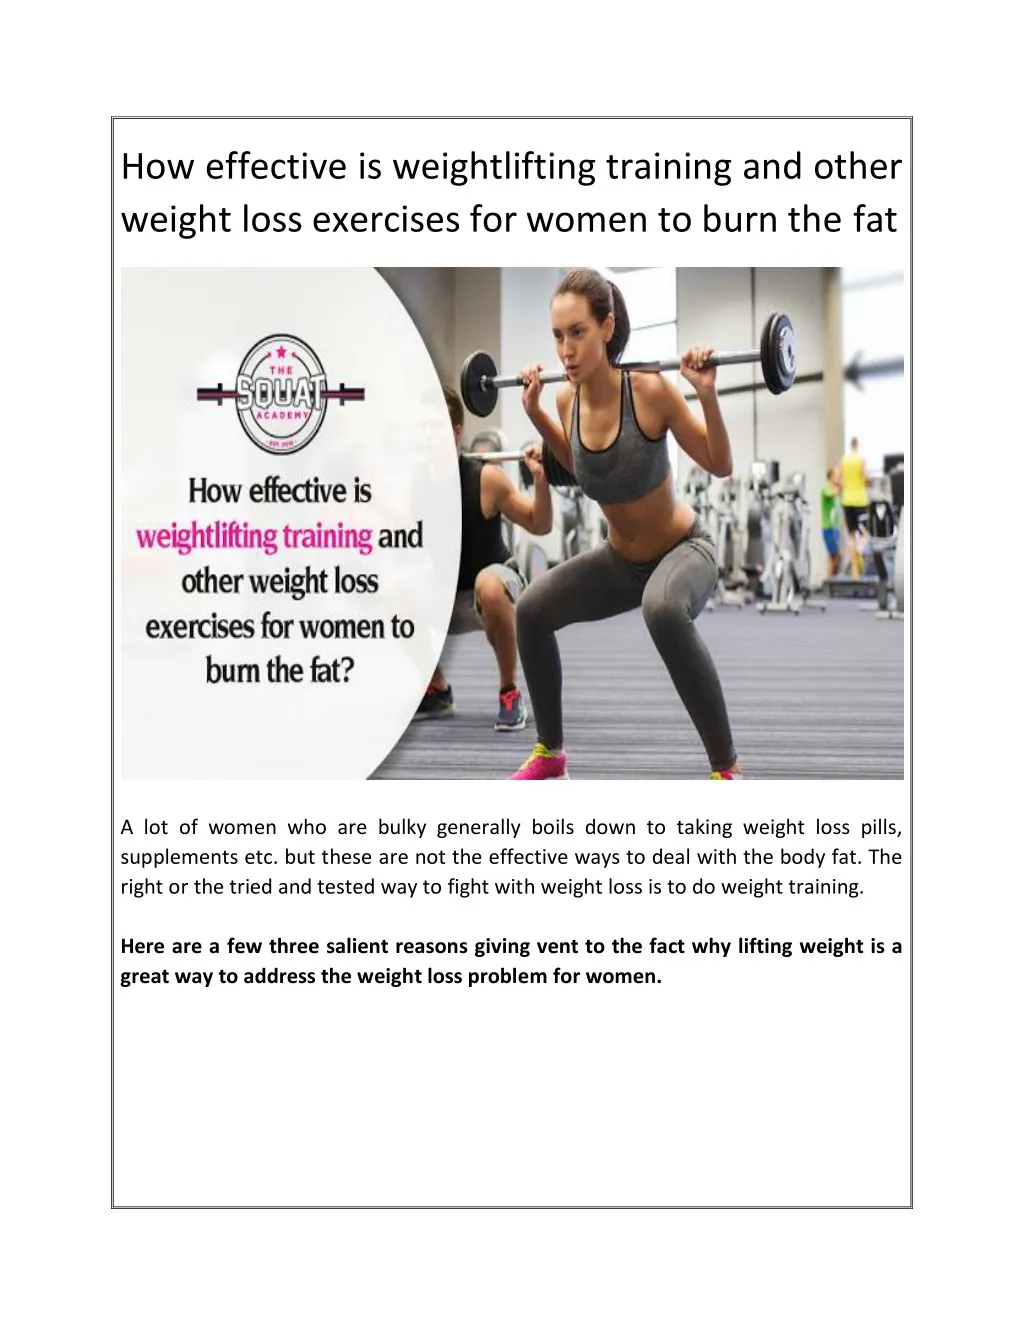 how effective is weightlifting training and other